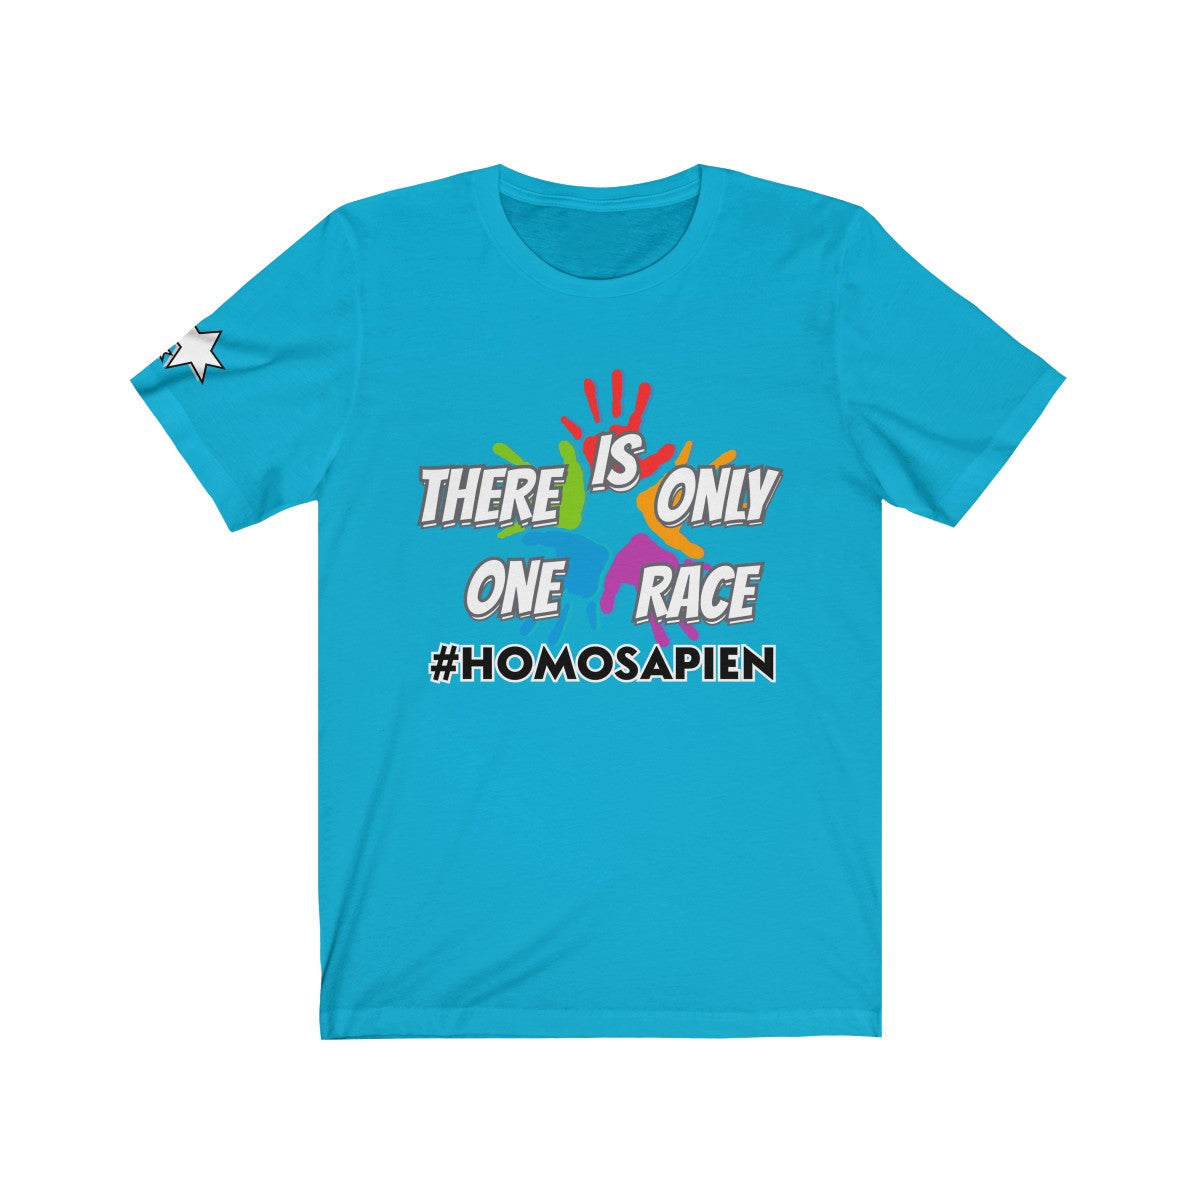 Unisex Jersey Short Sleeve Tee - There is only one Race